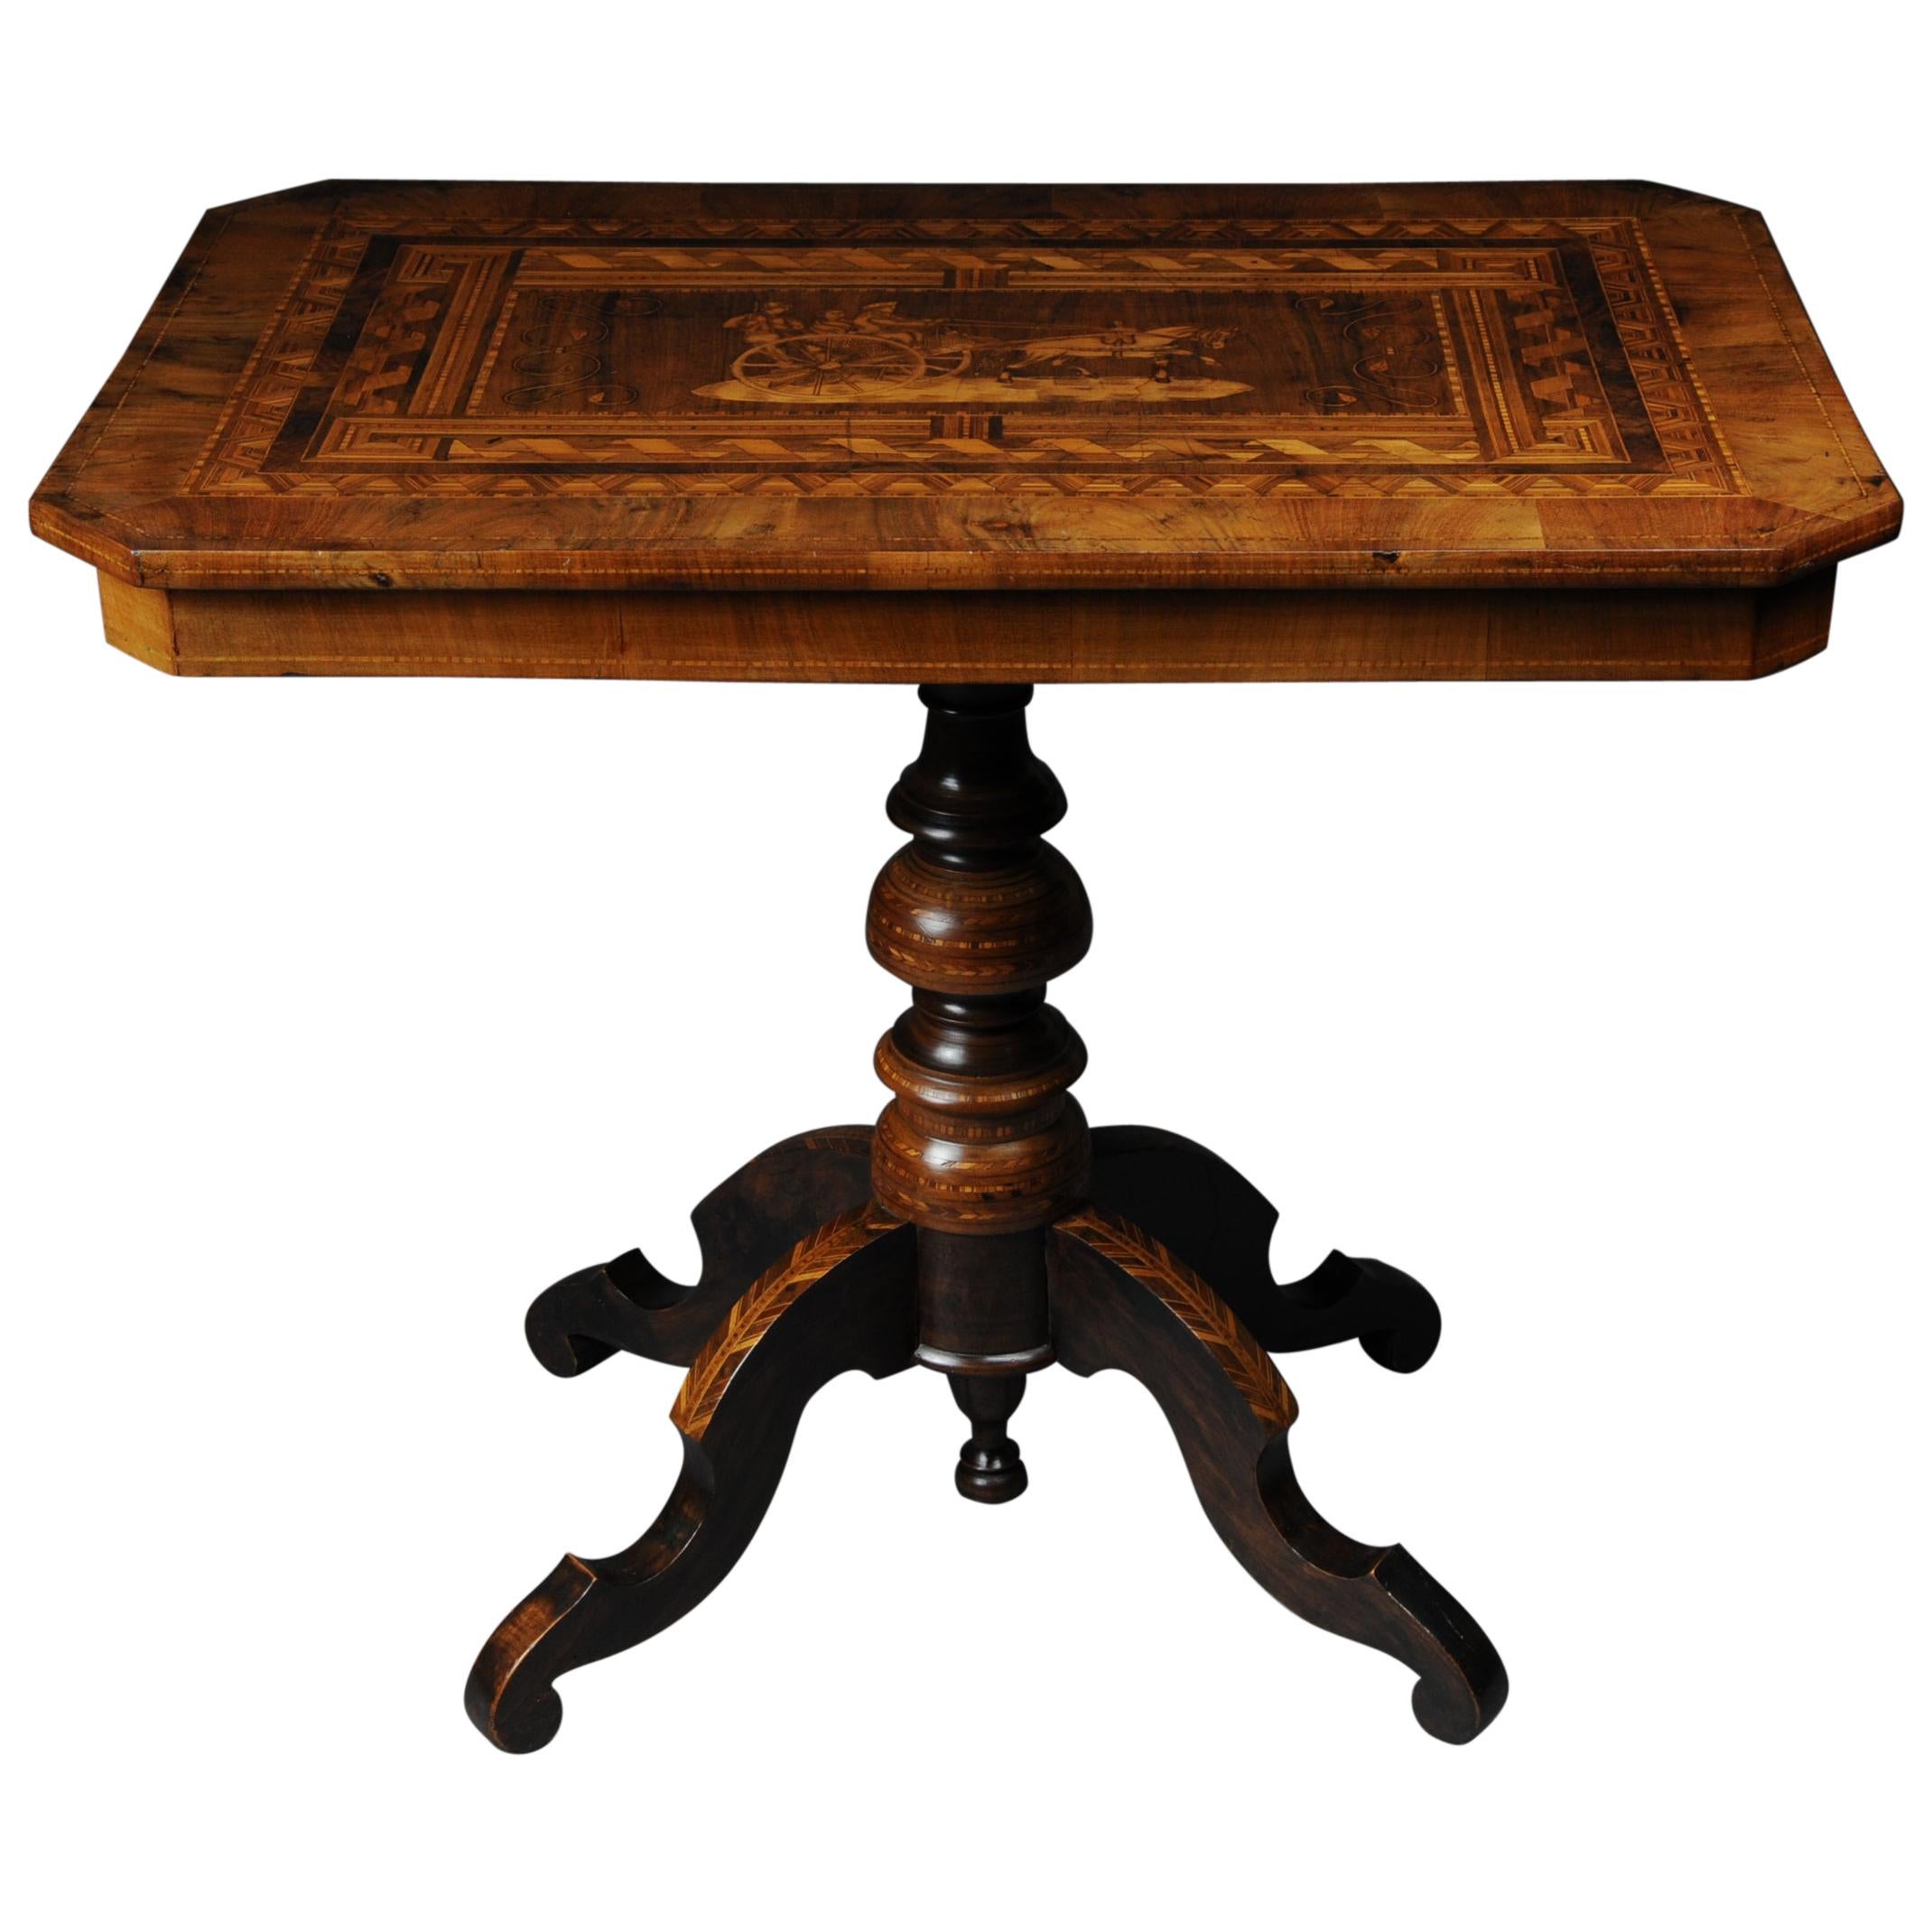 Antique Inlaid Table South German / Italy, circa 1845